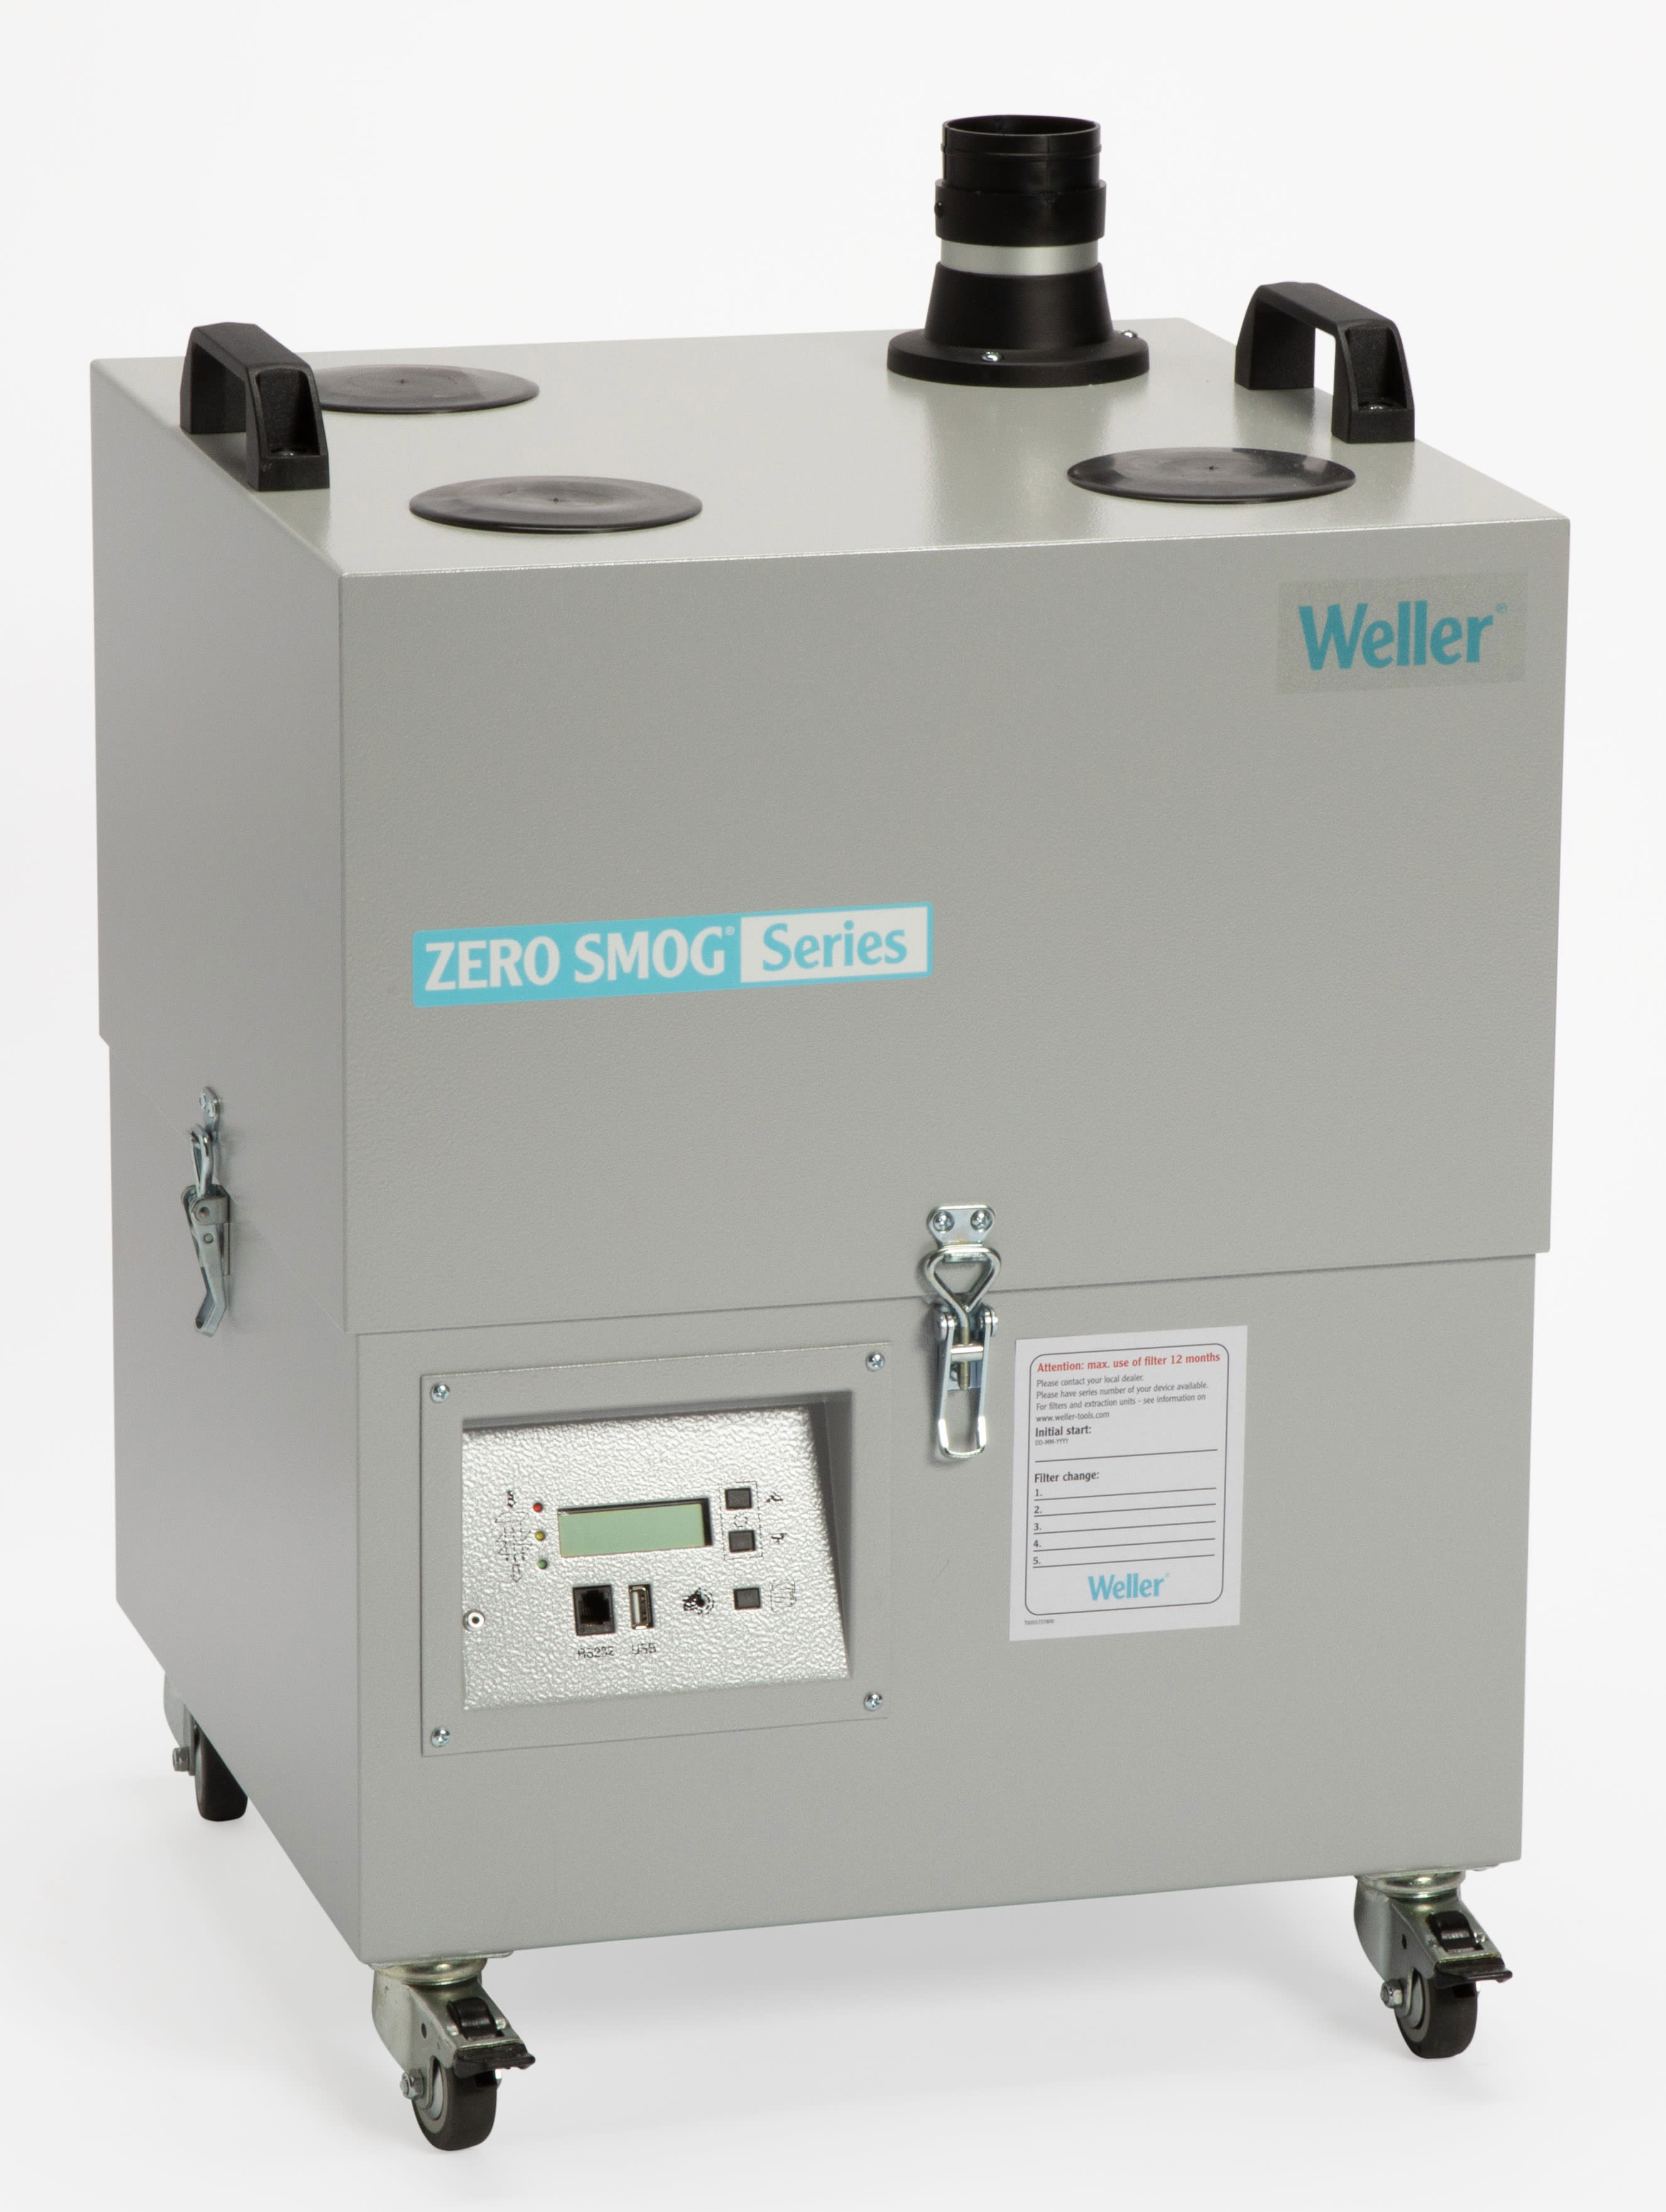 Weller ZERO SMOG 6V GAS Fume Extraction with gas filter | TEquipment